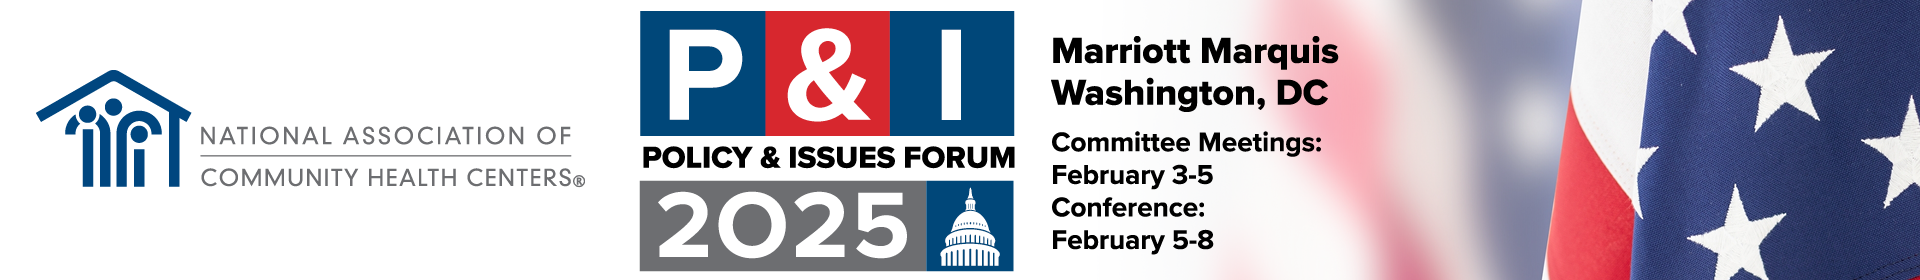 2025 Policy & Issues Forum (P&I) Event Banner